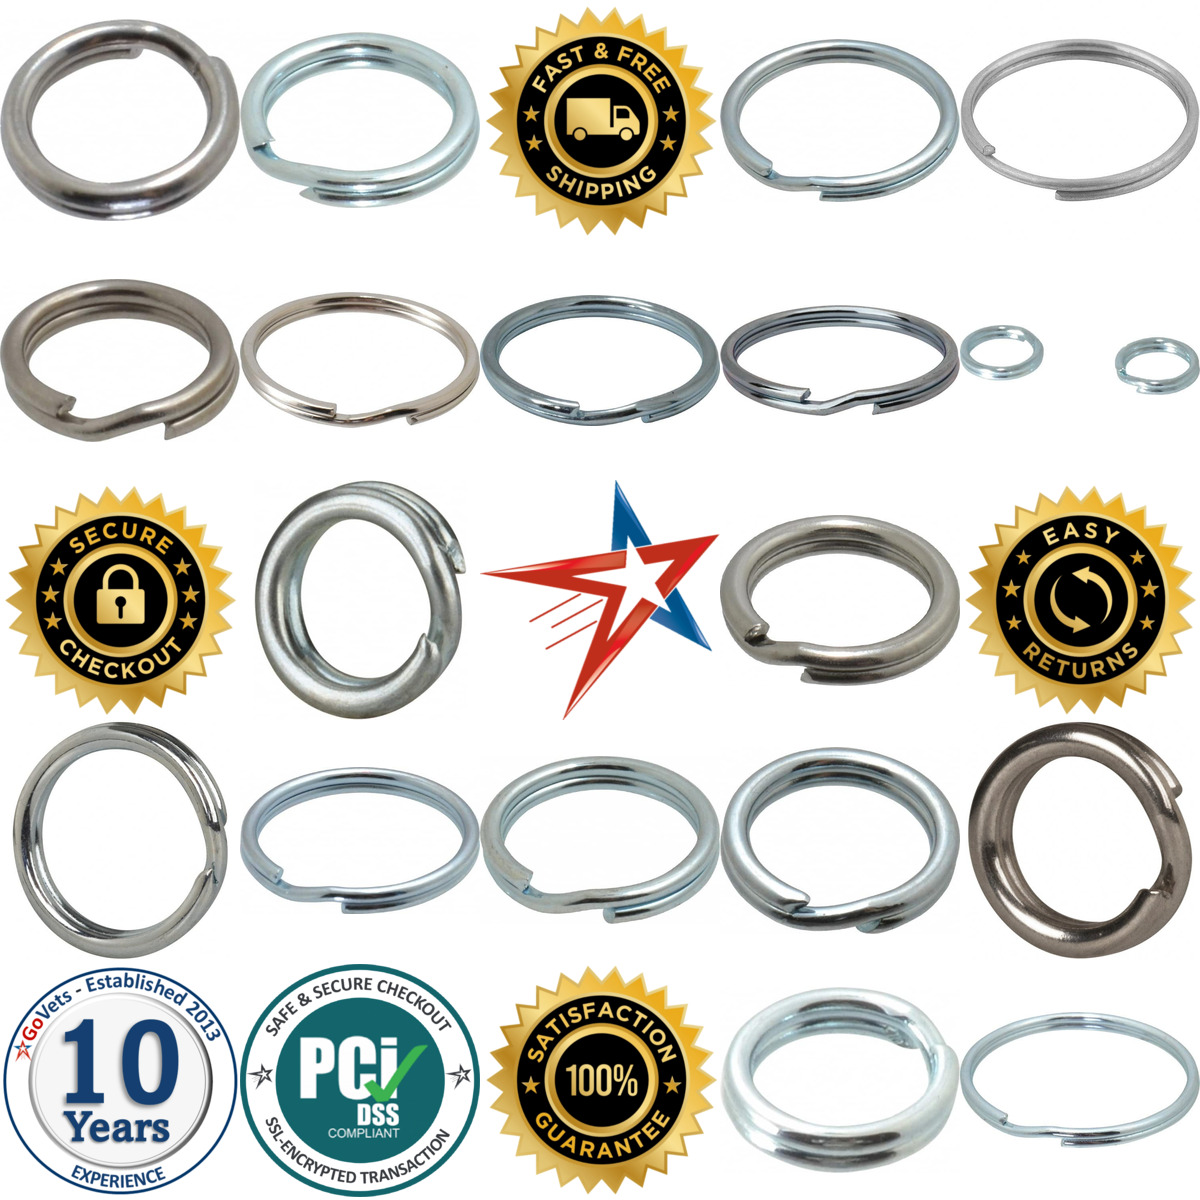 A selection of Split Rings products on GoVets